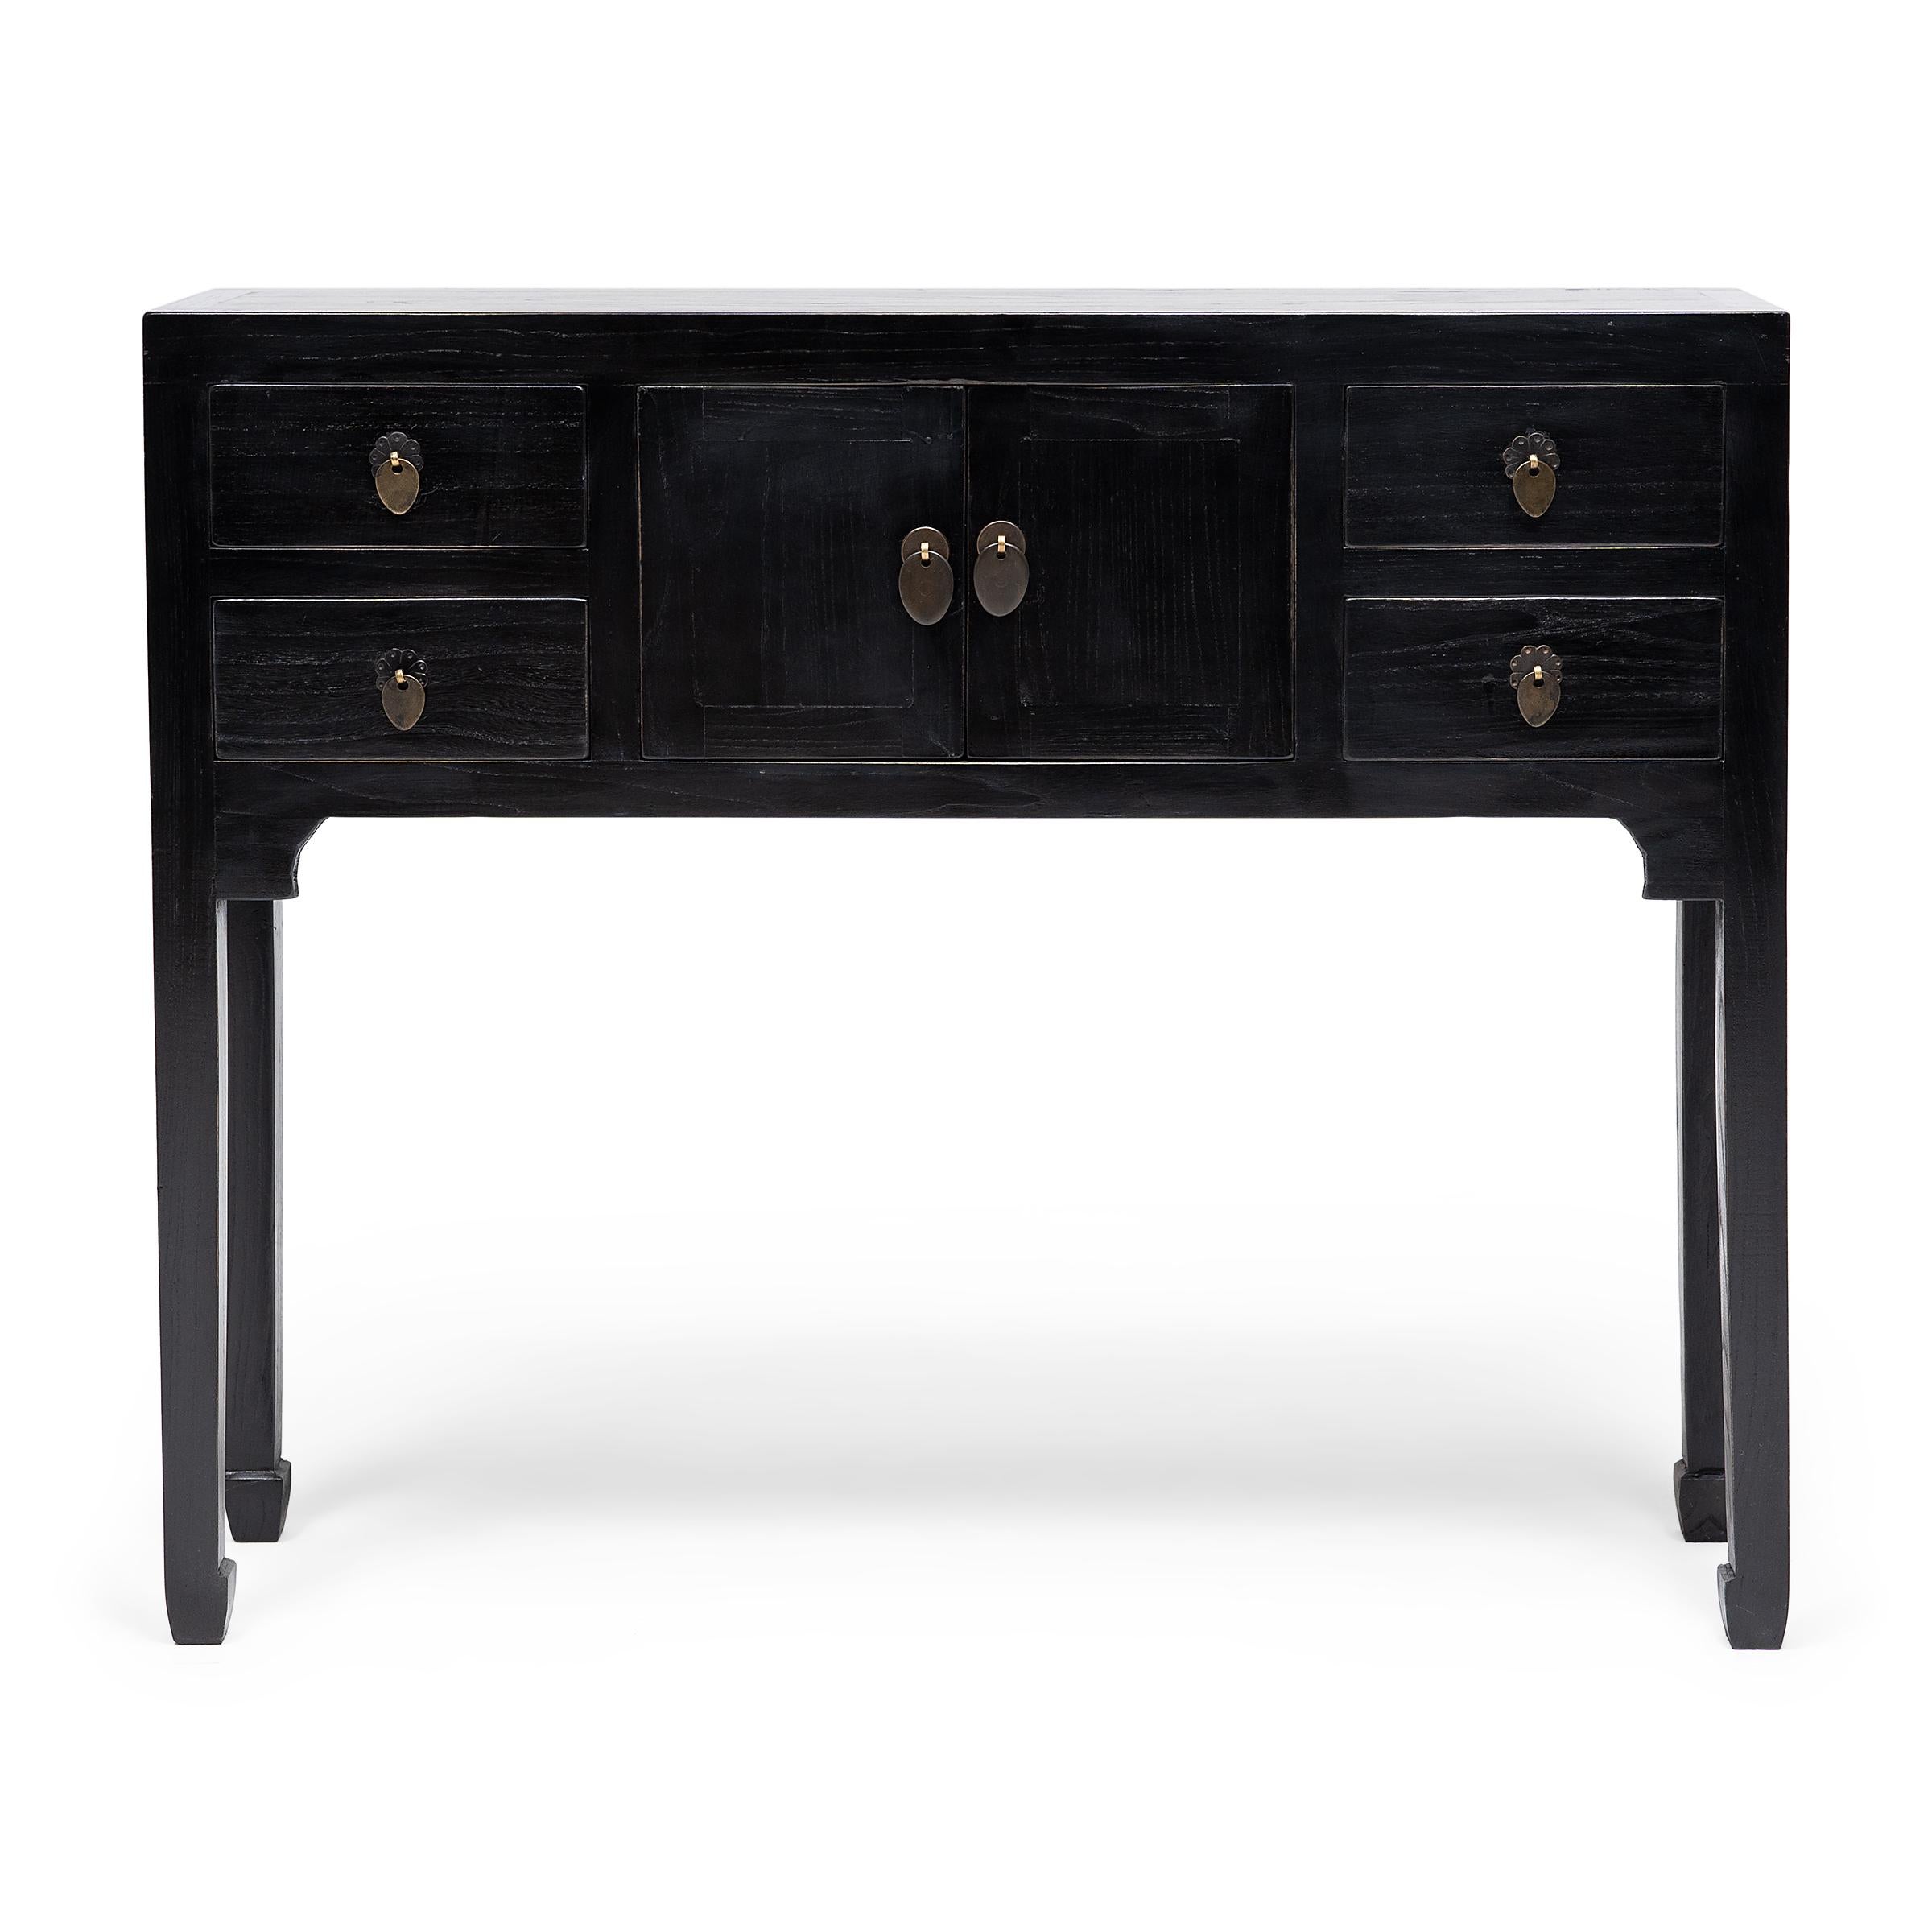 This petite altar coffer keeps with the style of Ming-dynasty furniture through its clean lines and minimal ornamentation. The slim legs and delicate hoof feet bring the eye upwards the squared frame and contribute to the effortless simplicity of